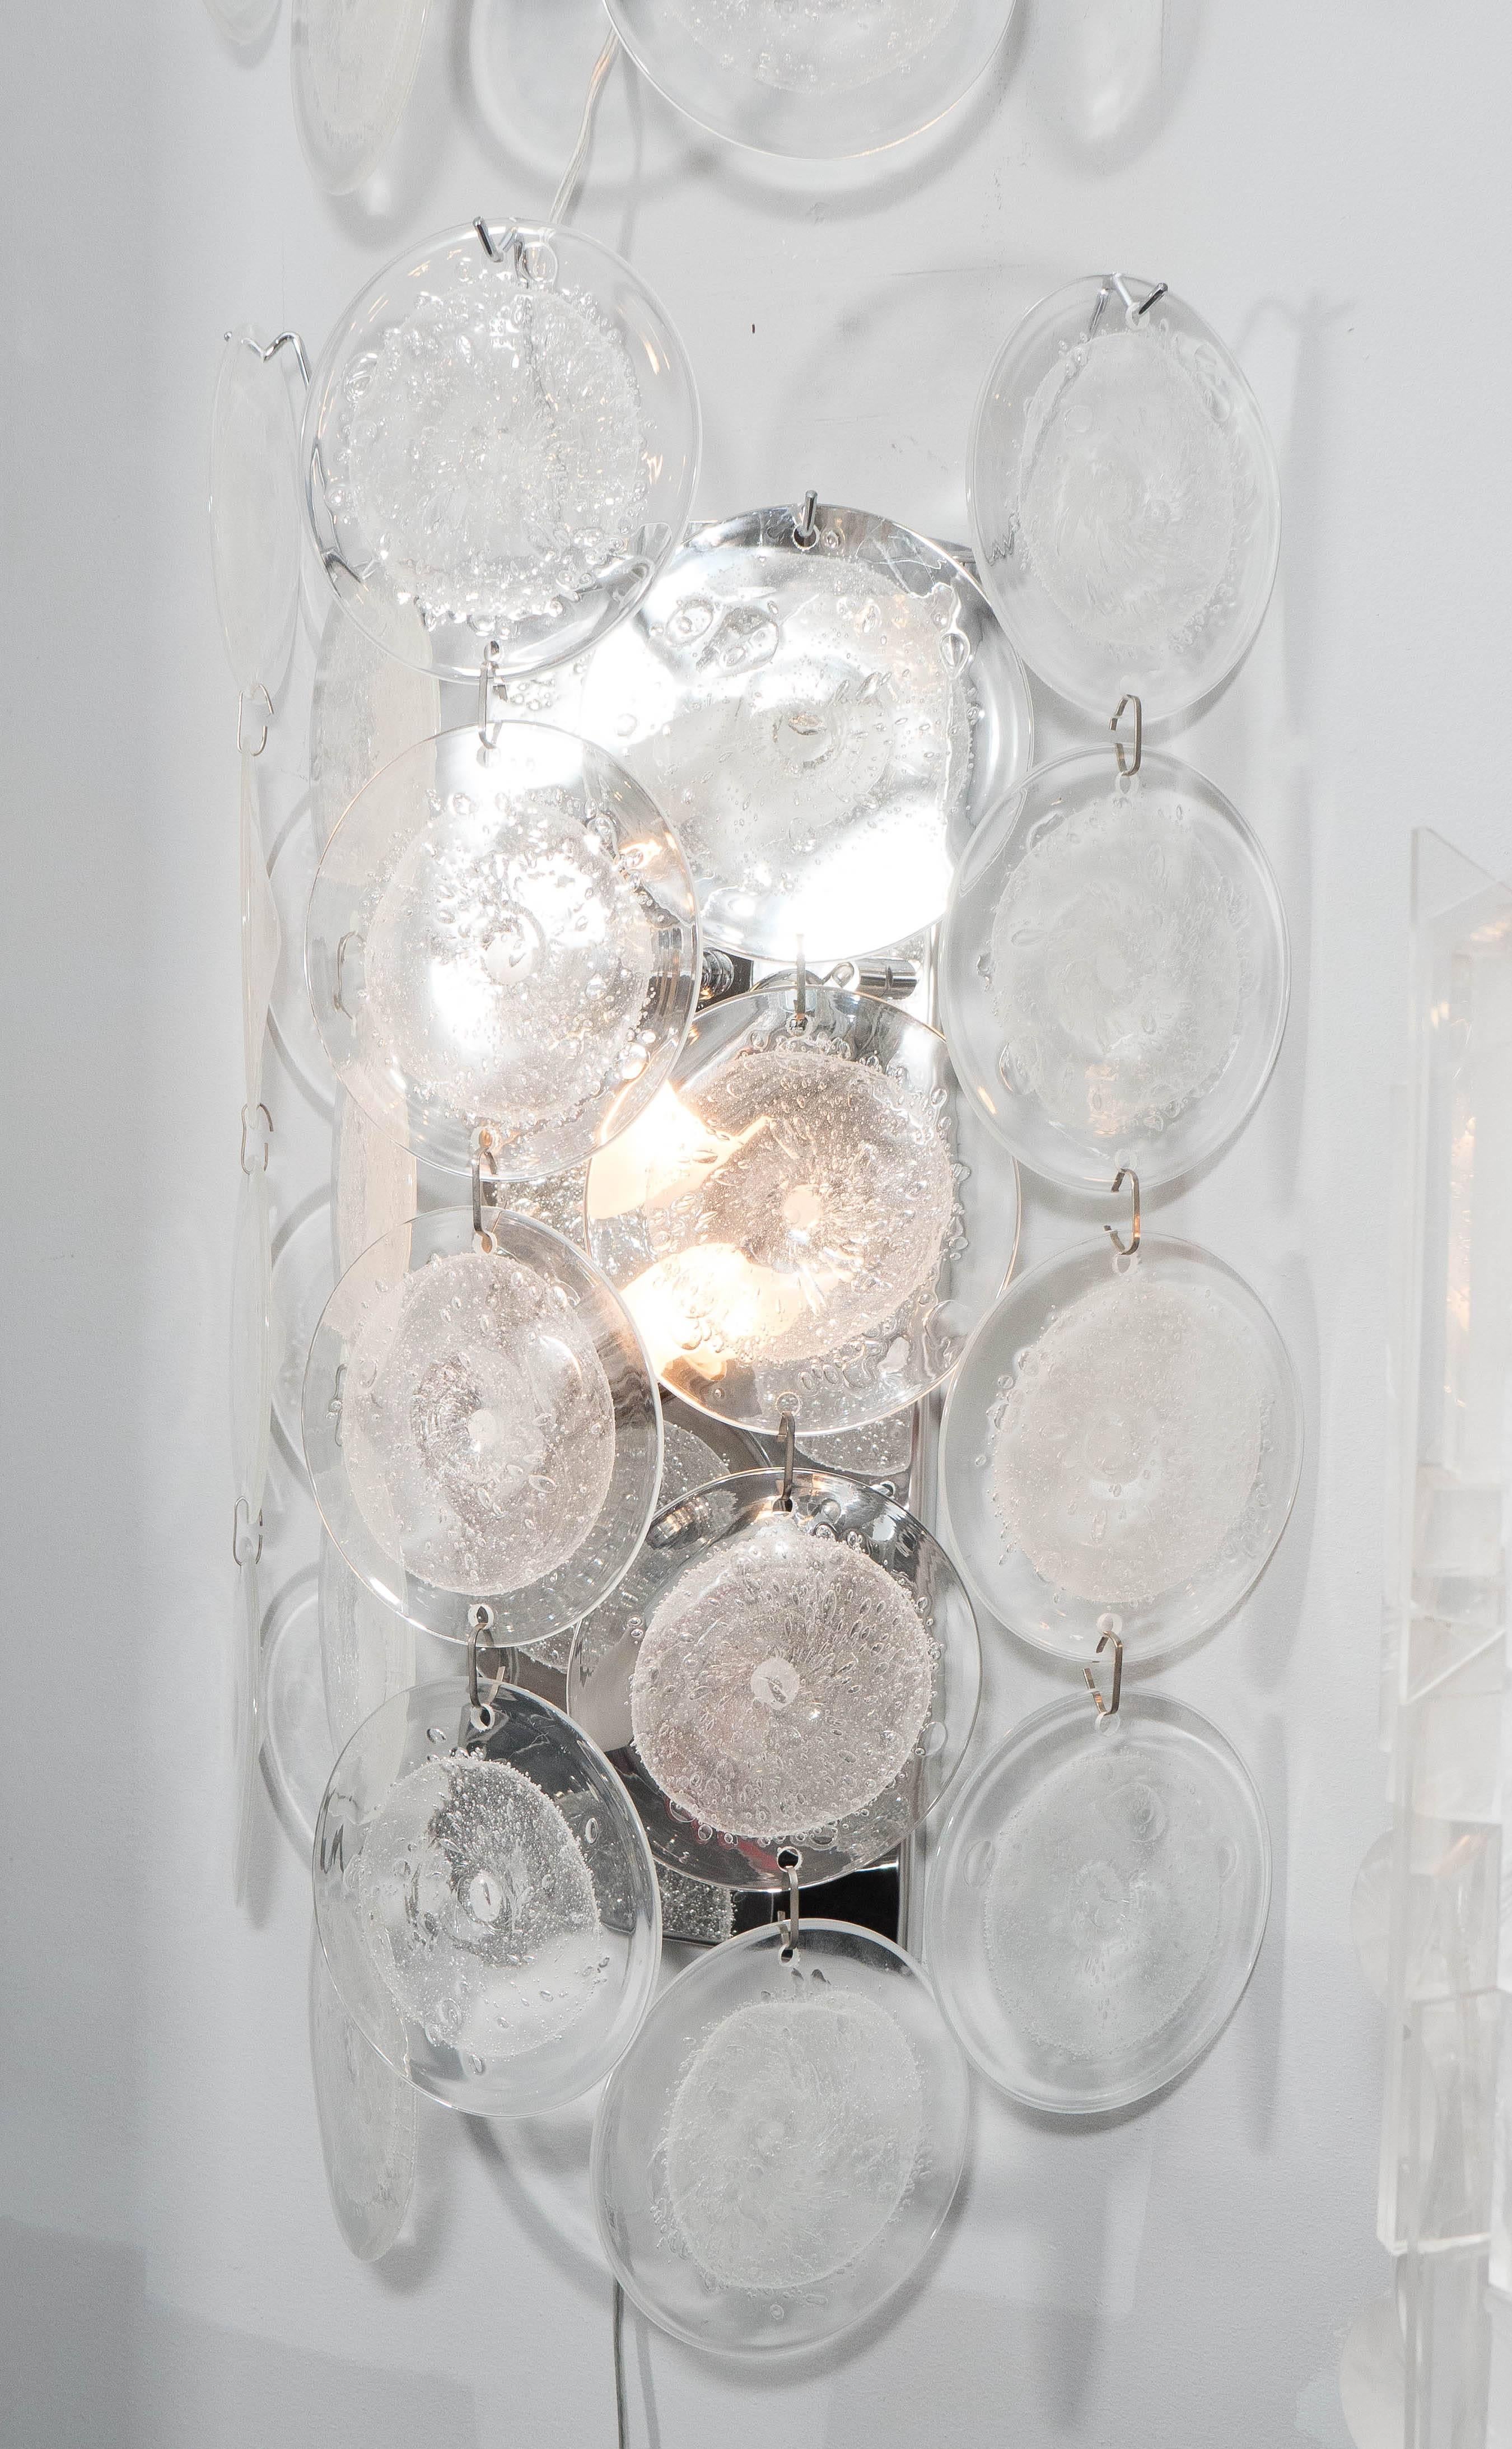 Pair of custom clear pulegoso Murano glass disc sconces, with stainless steel frame. Customization is available in different sizes, finishes and glass colors.